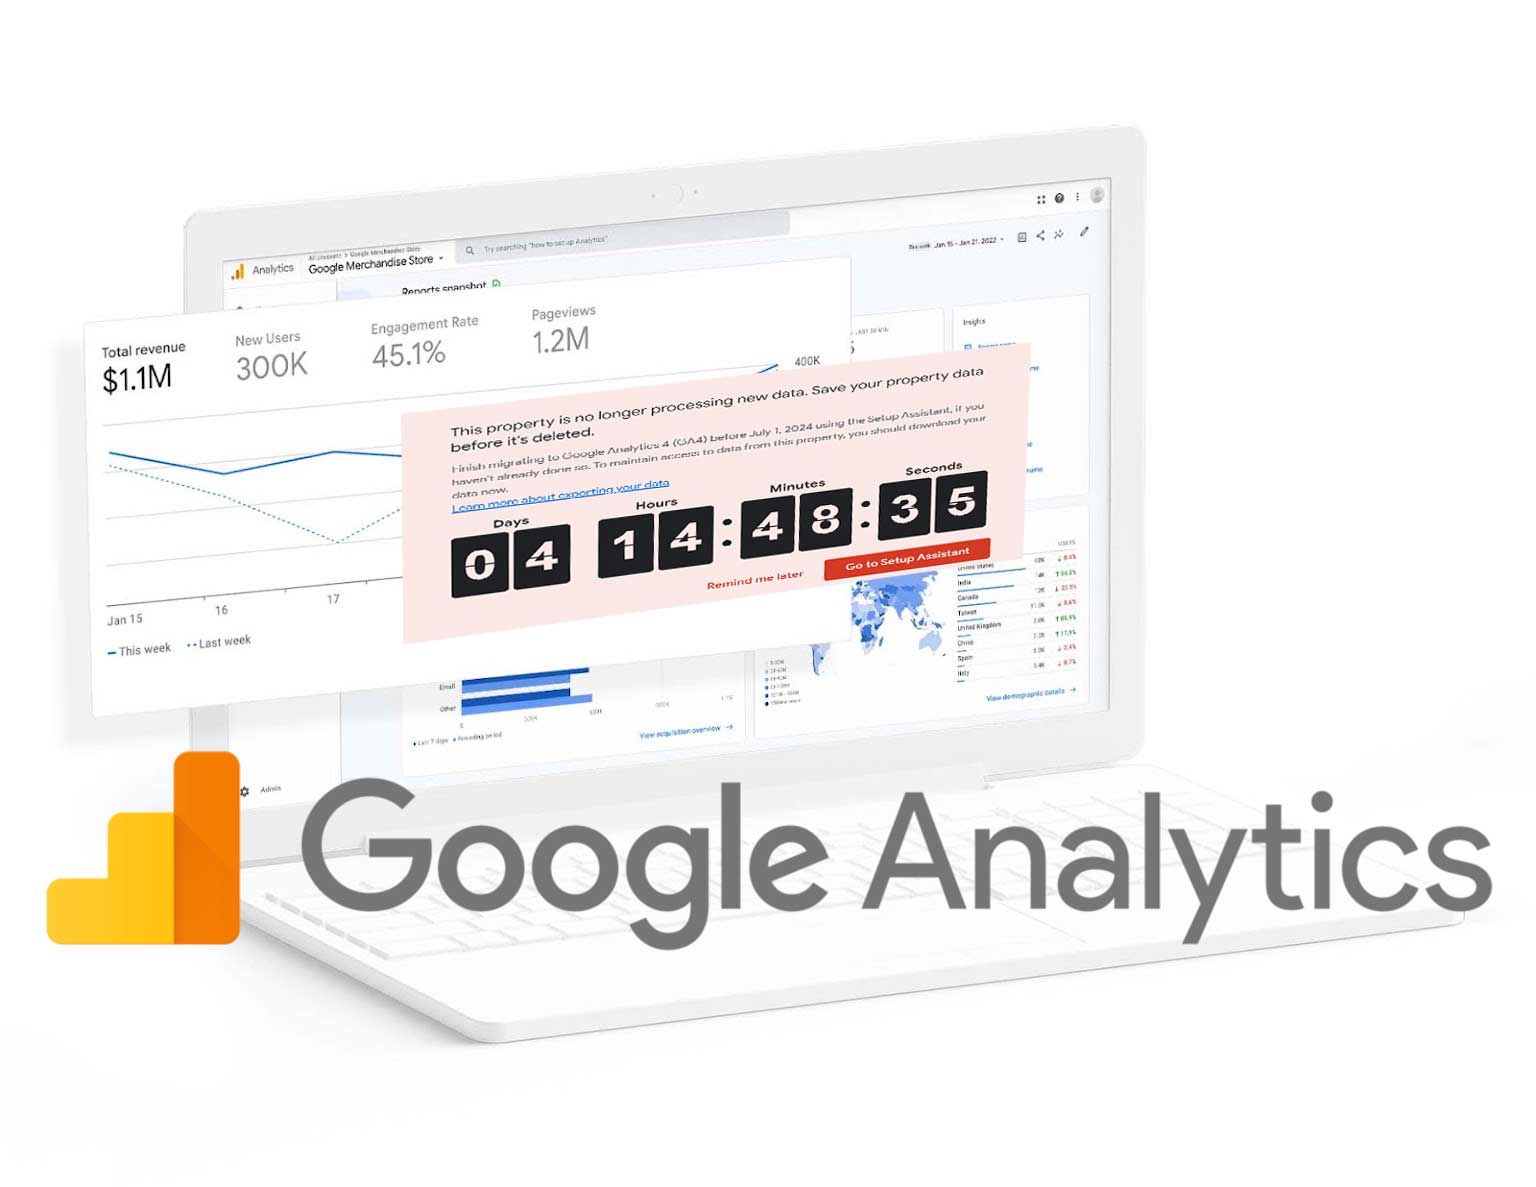 Google Plans Complete Phase-Out of Universal Analytics by July